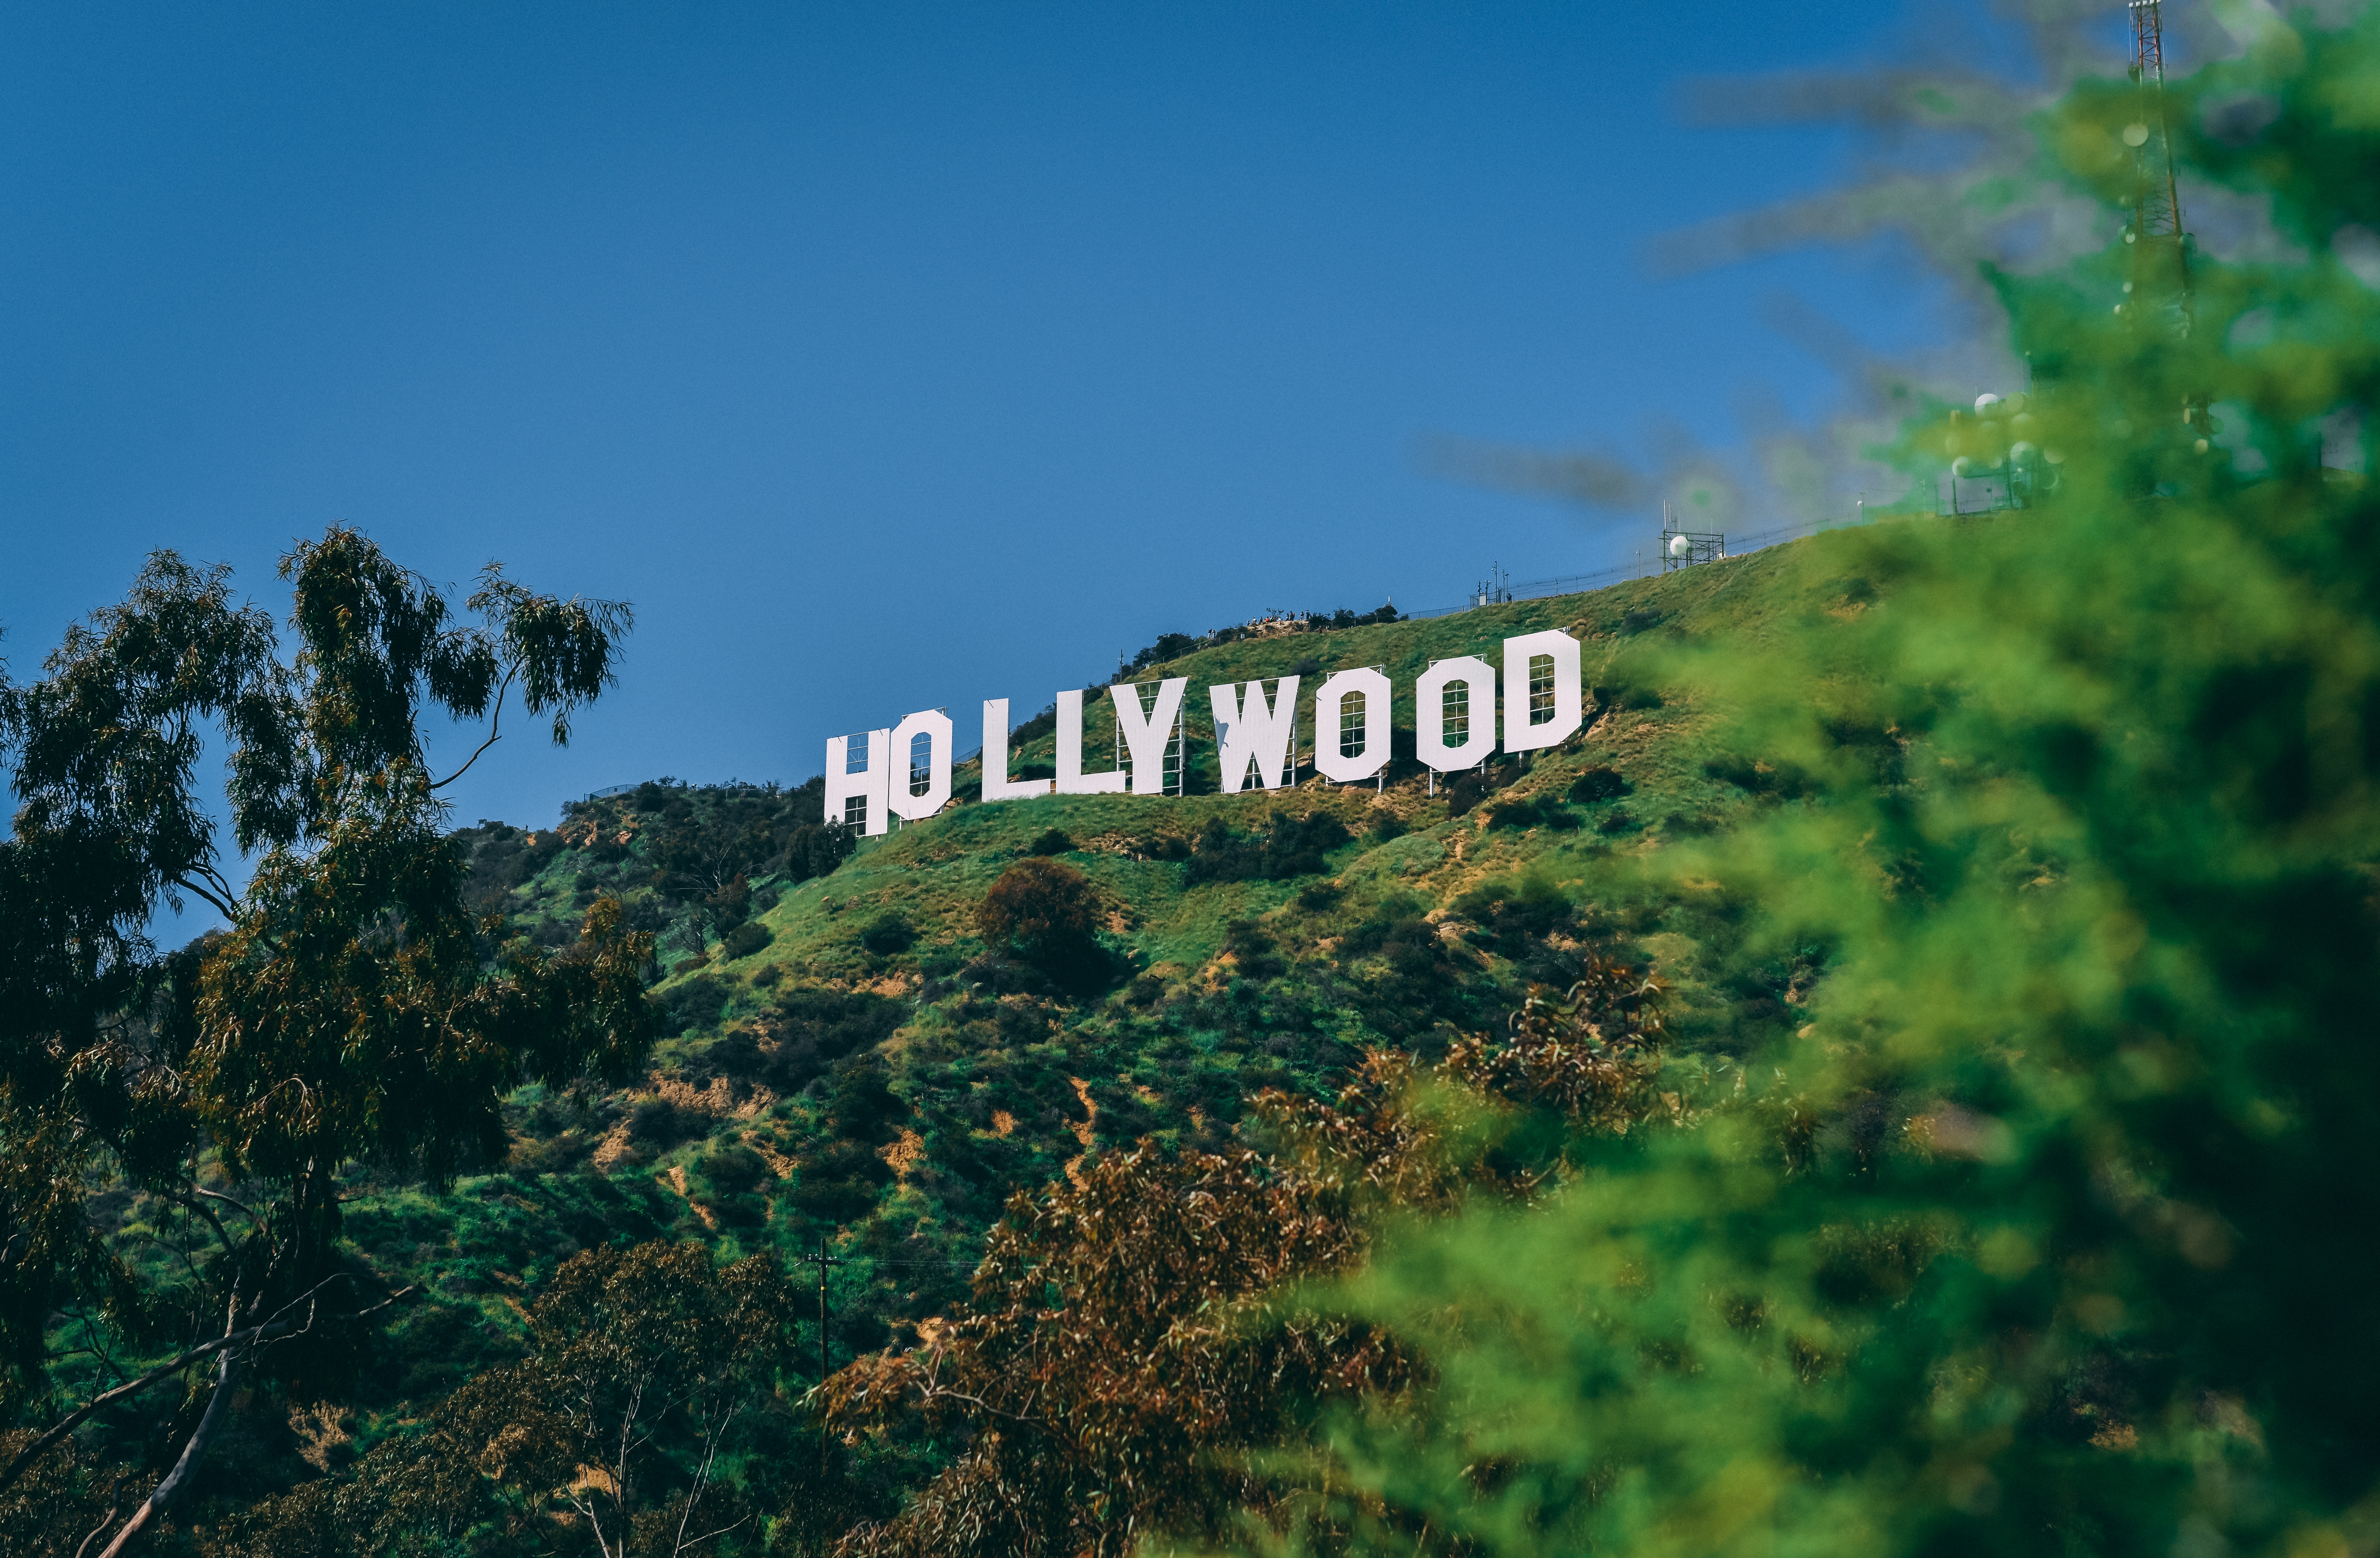 Tour Hollywood for an unforgettable experience 
Los Angeles from $110